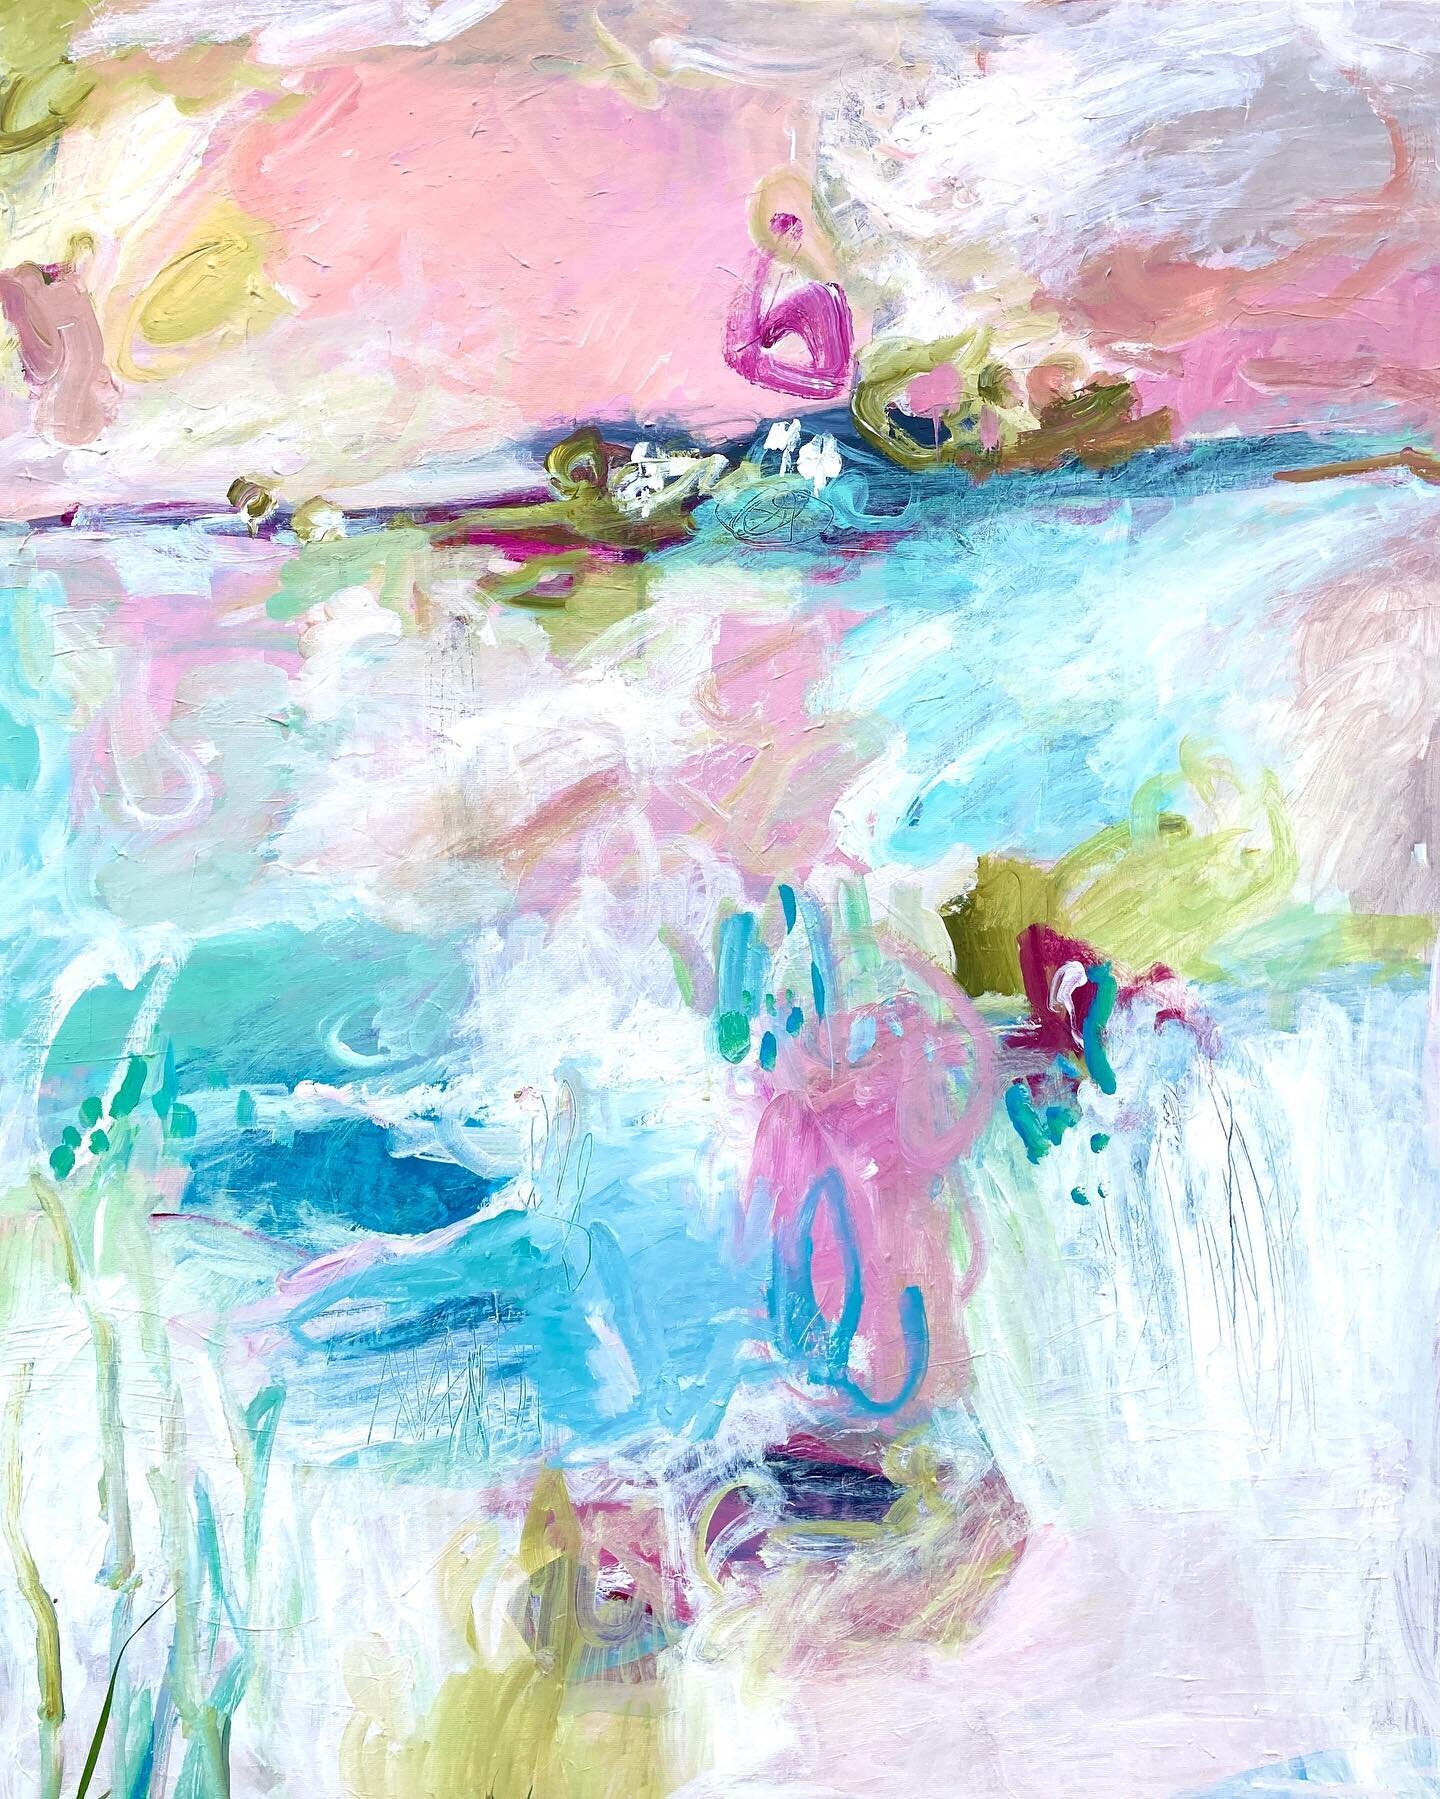 #abstractlandscape #abstractpainting